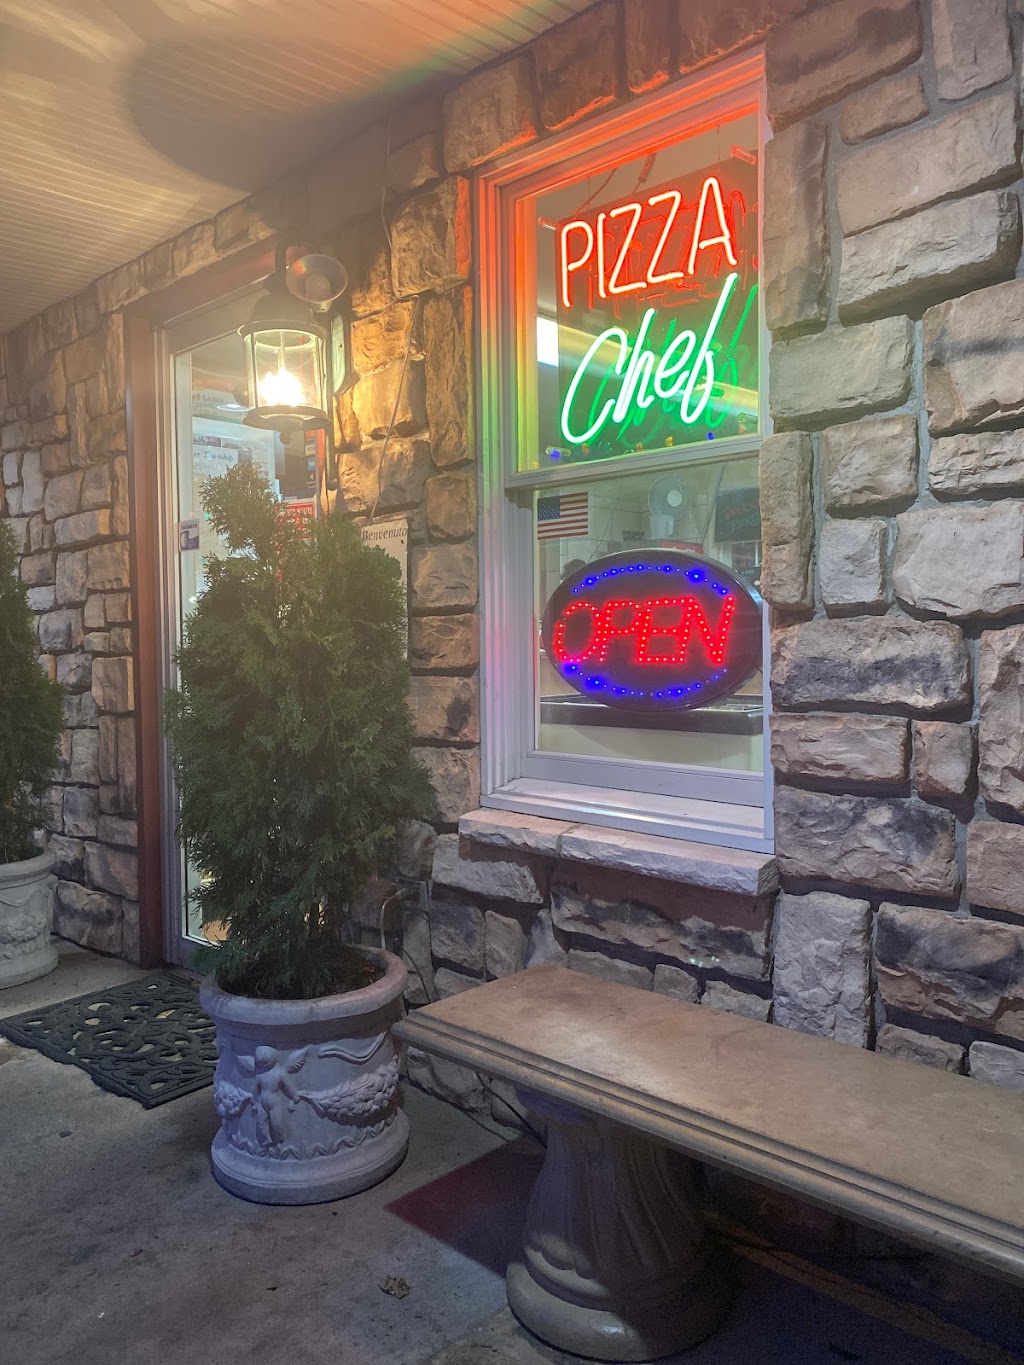 Pizza chef | 4011 William Penn Hwy, Easton, PA 18045 | Phone: (610) 258-5800